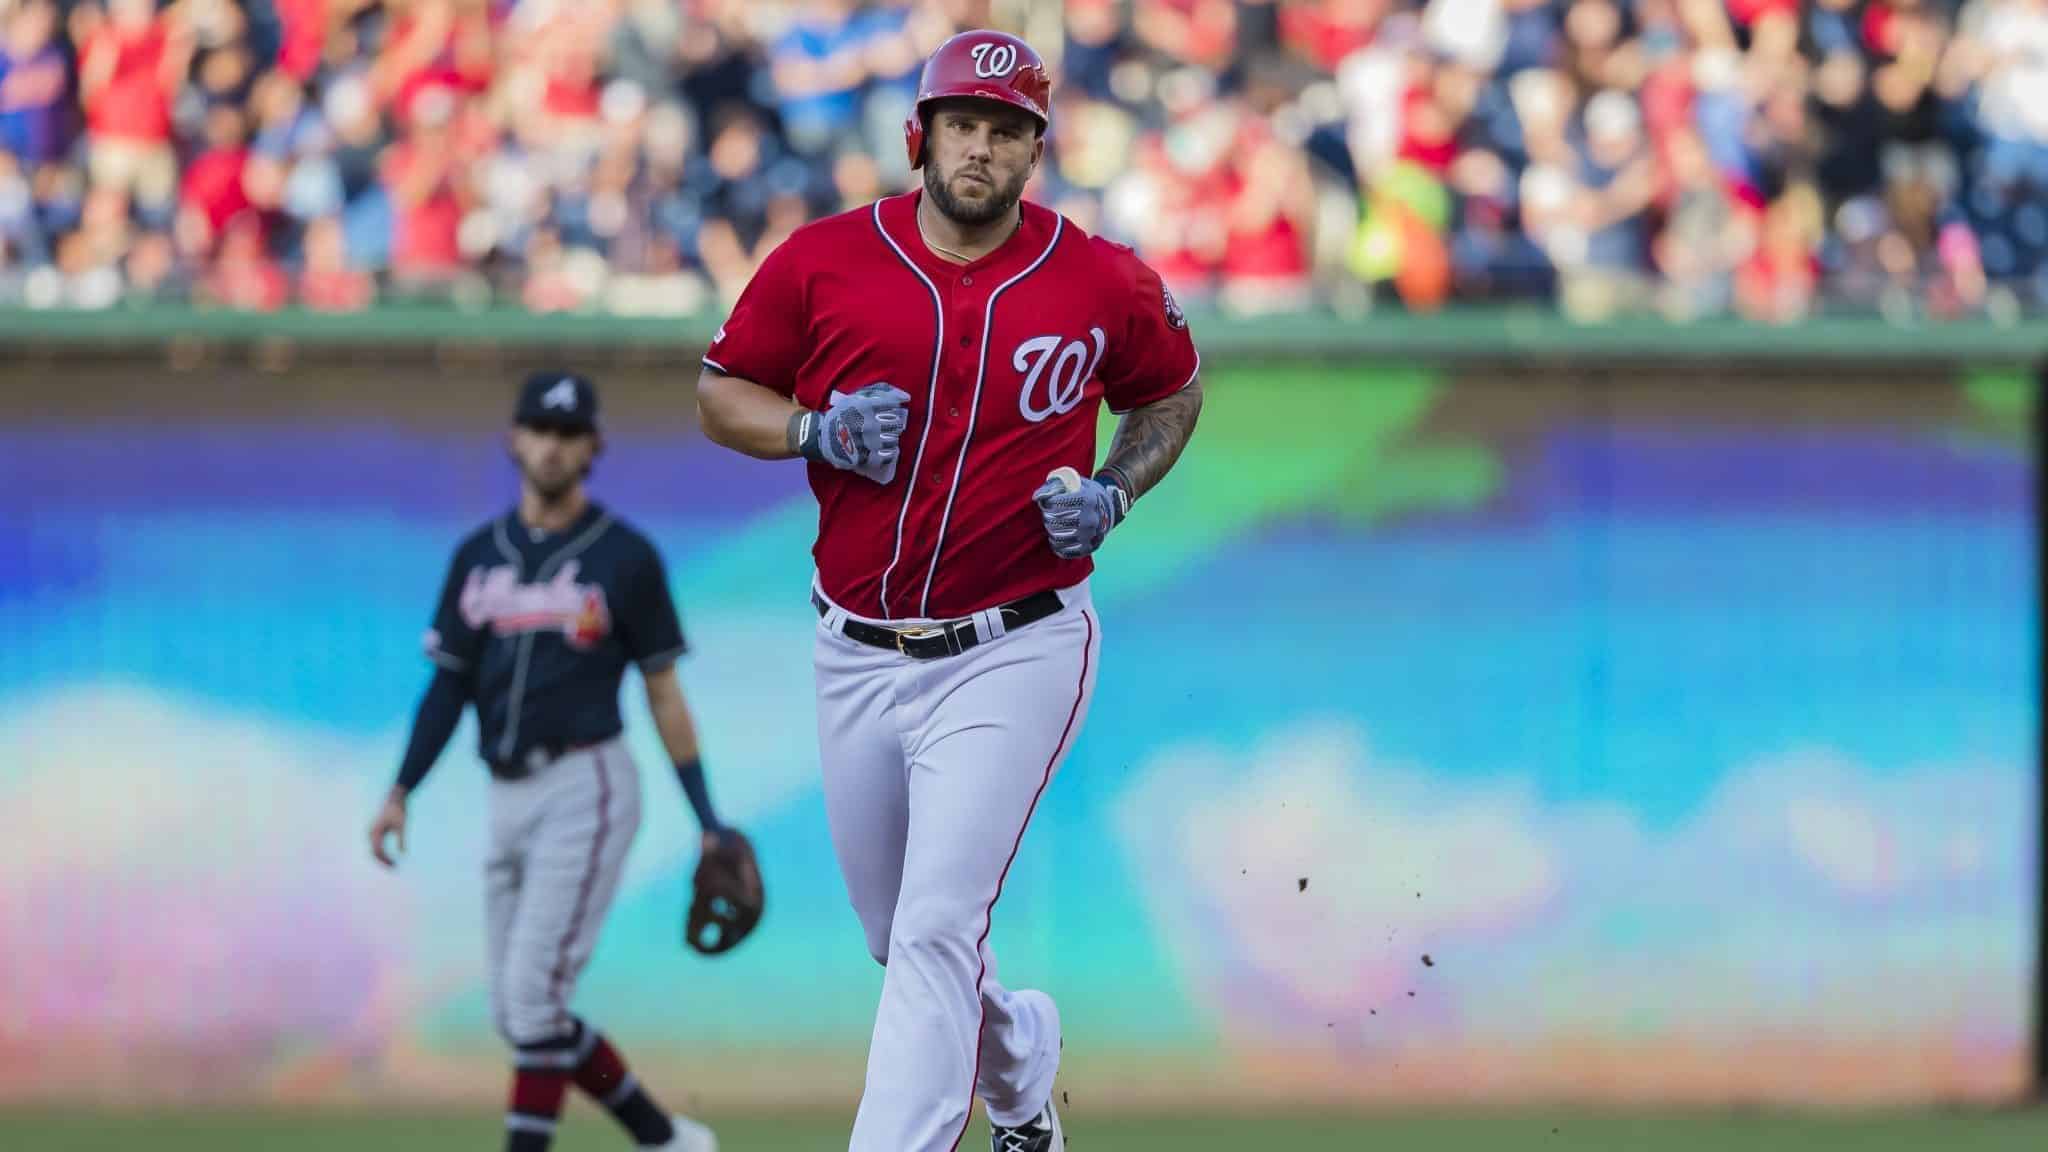 WASHINGTON, DC - JUNE 22: Matt Adams #15 of the Washington Nationals rounds the bases after hitting a two-run home run against the Atlanta Braves during the first inning at Nationals Park on June 22, 2019 in Washington, DC.